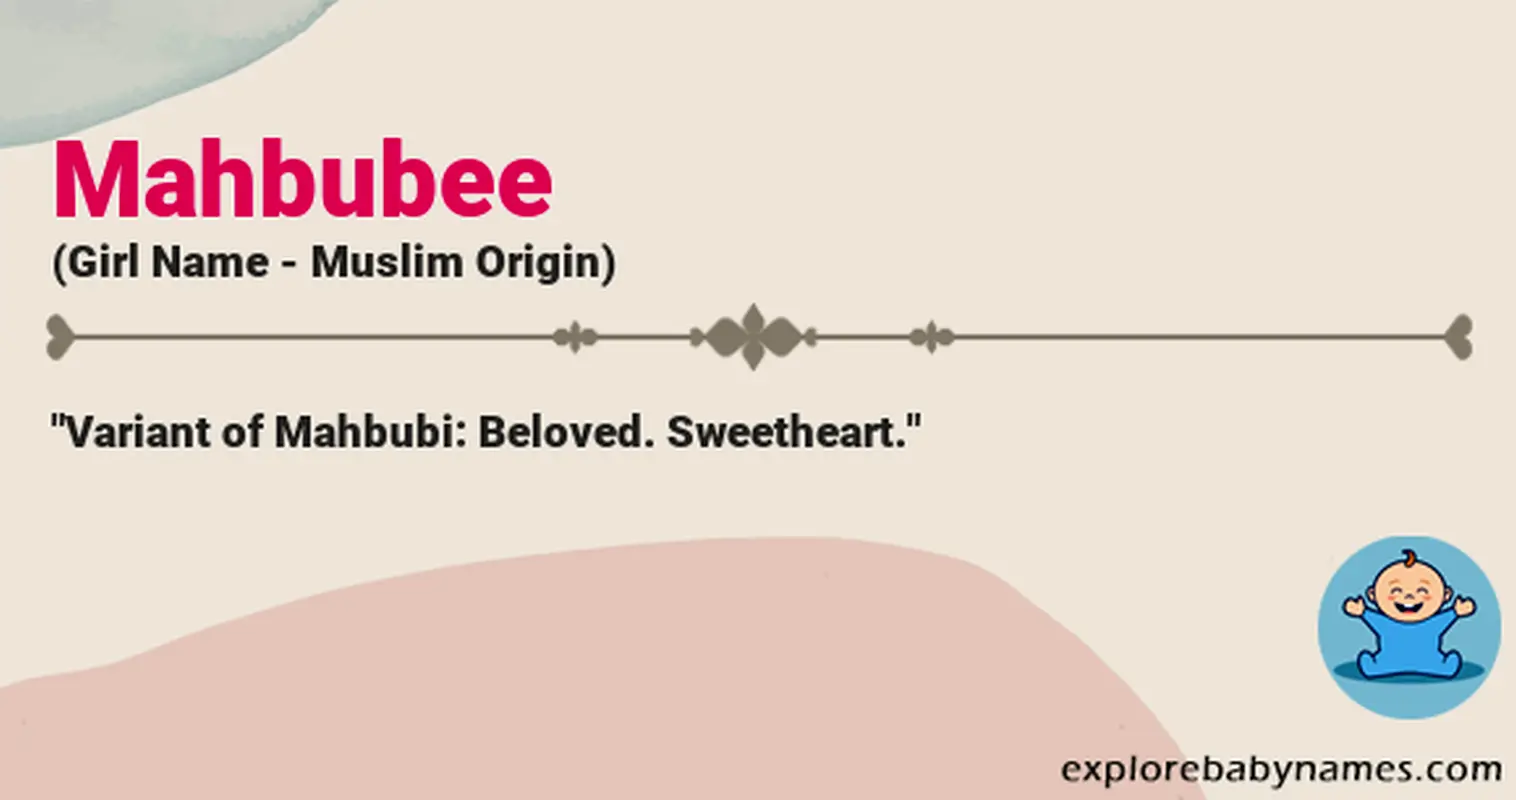 Meaning of Mahbubee